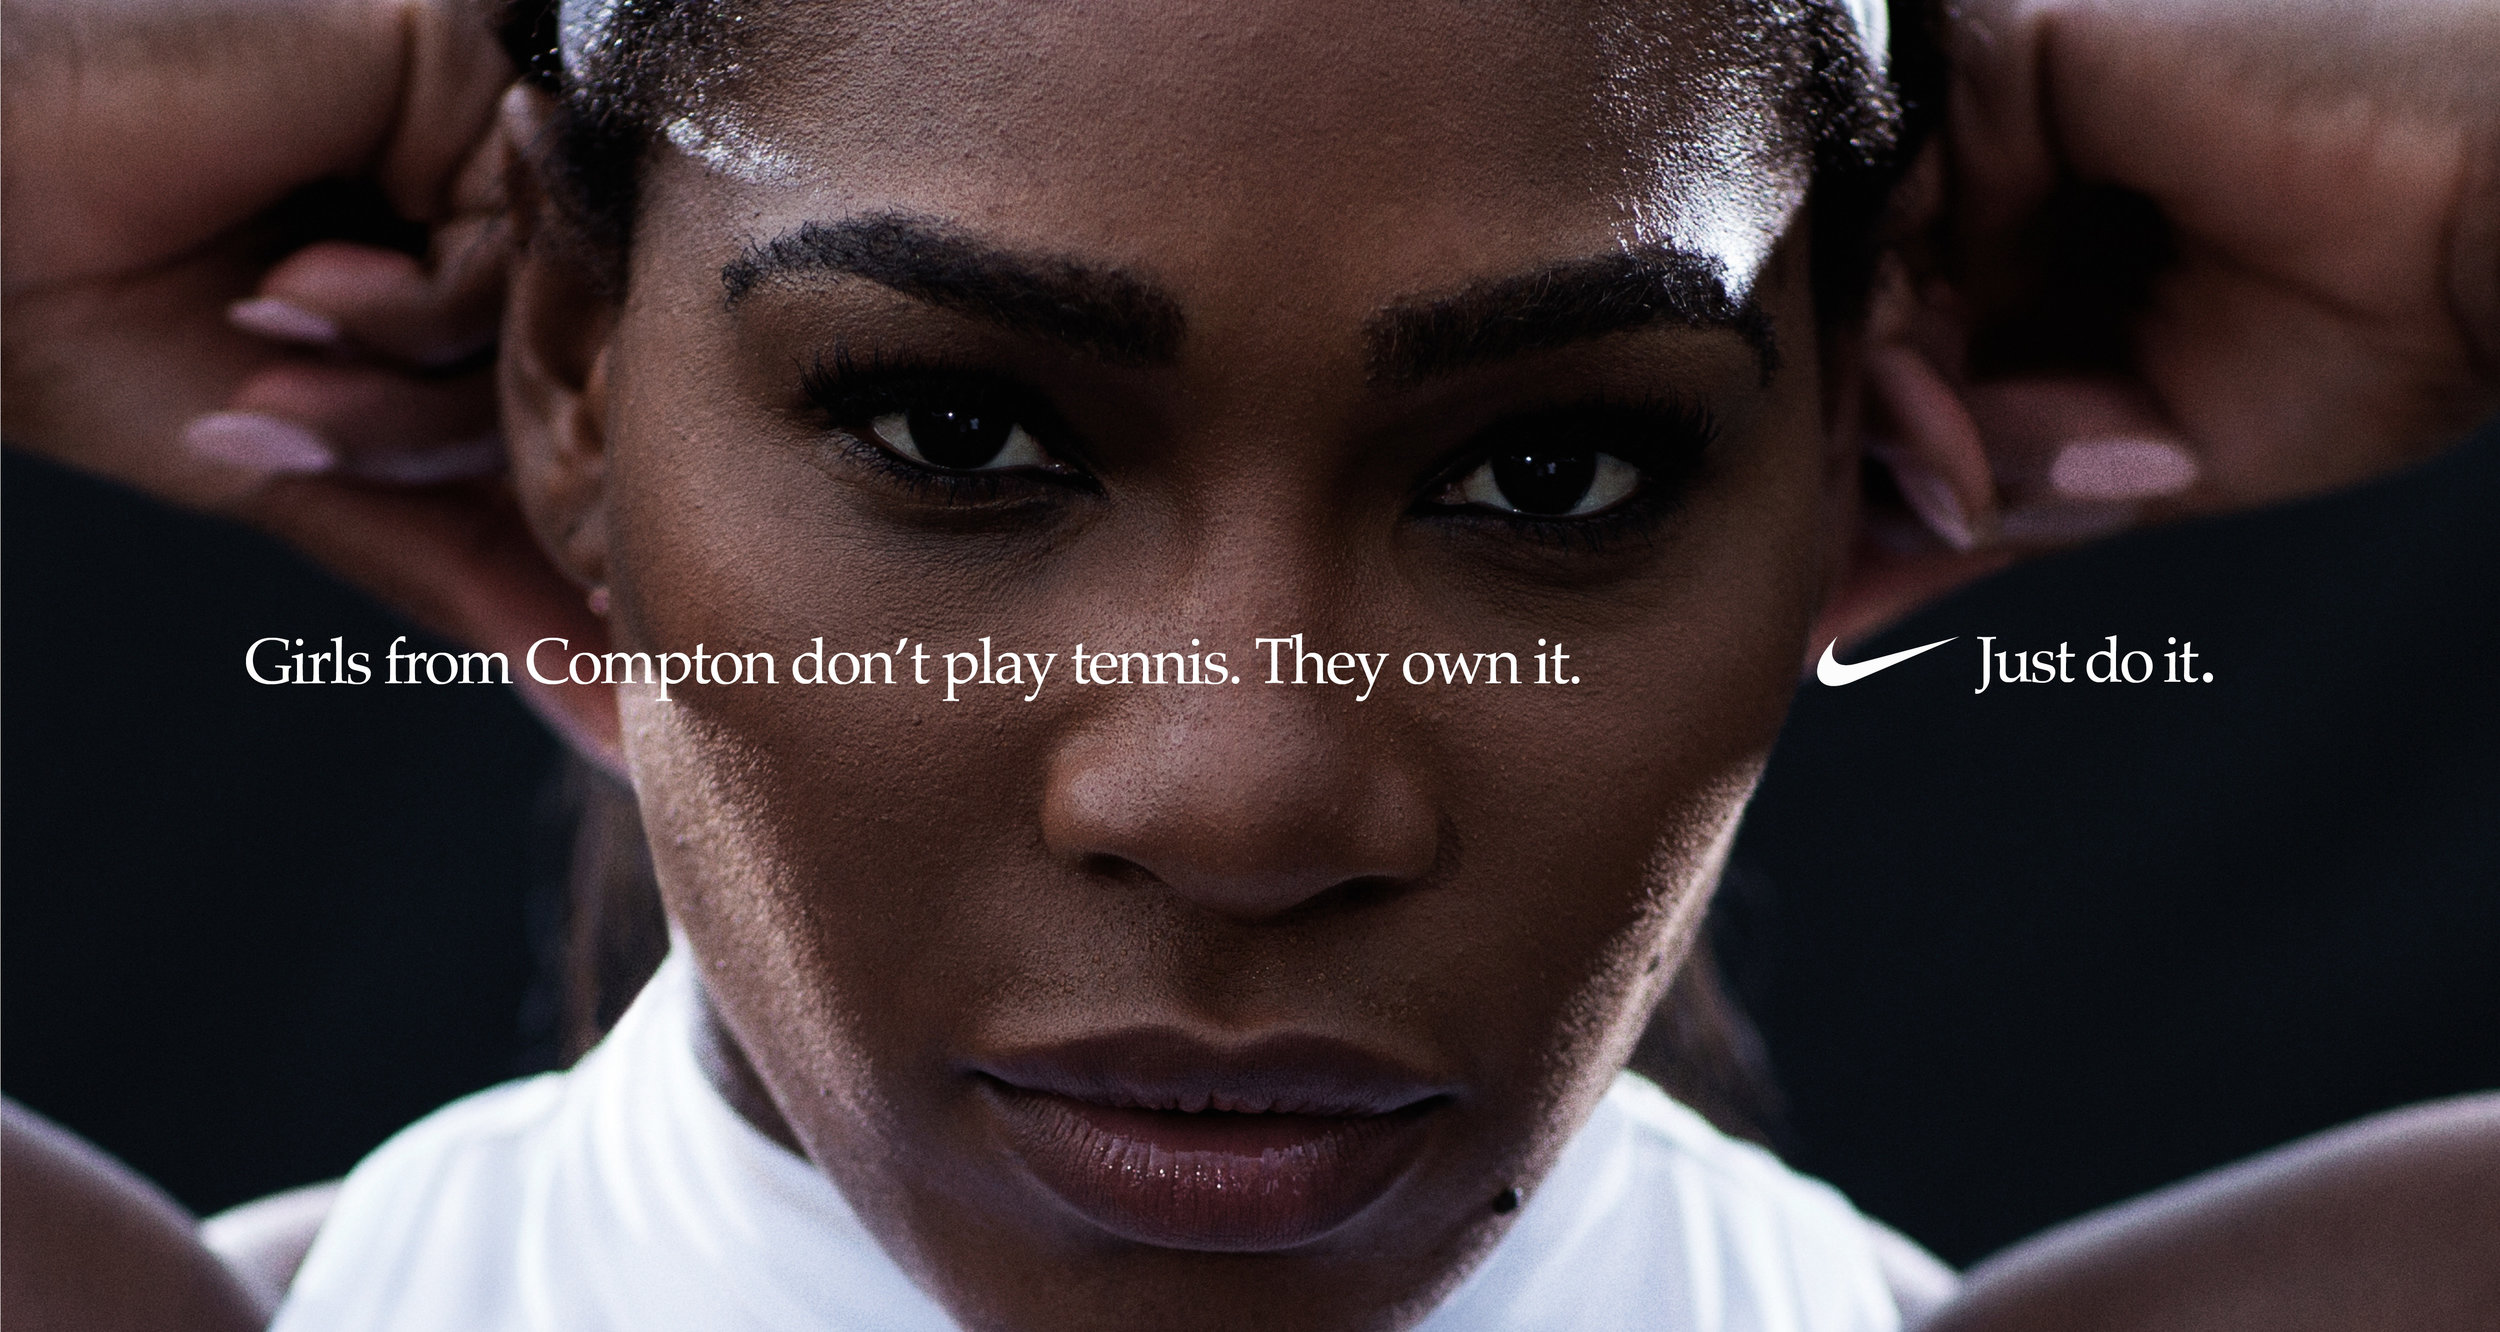 nike commercial crazy